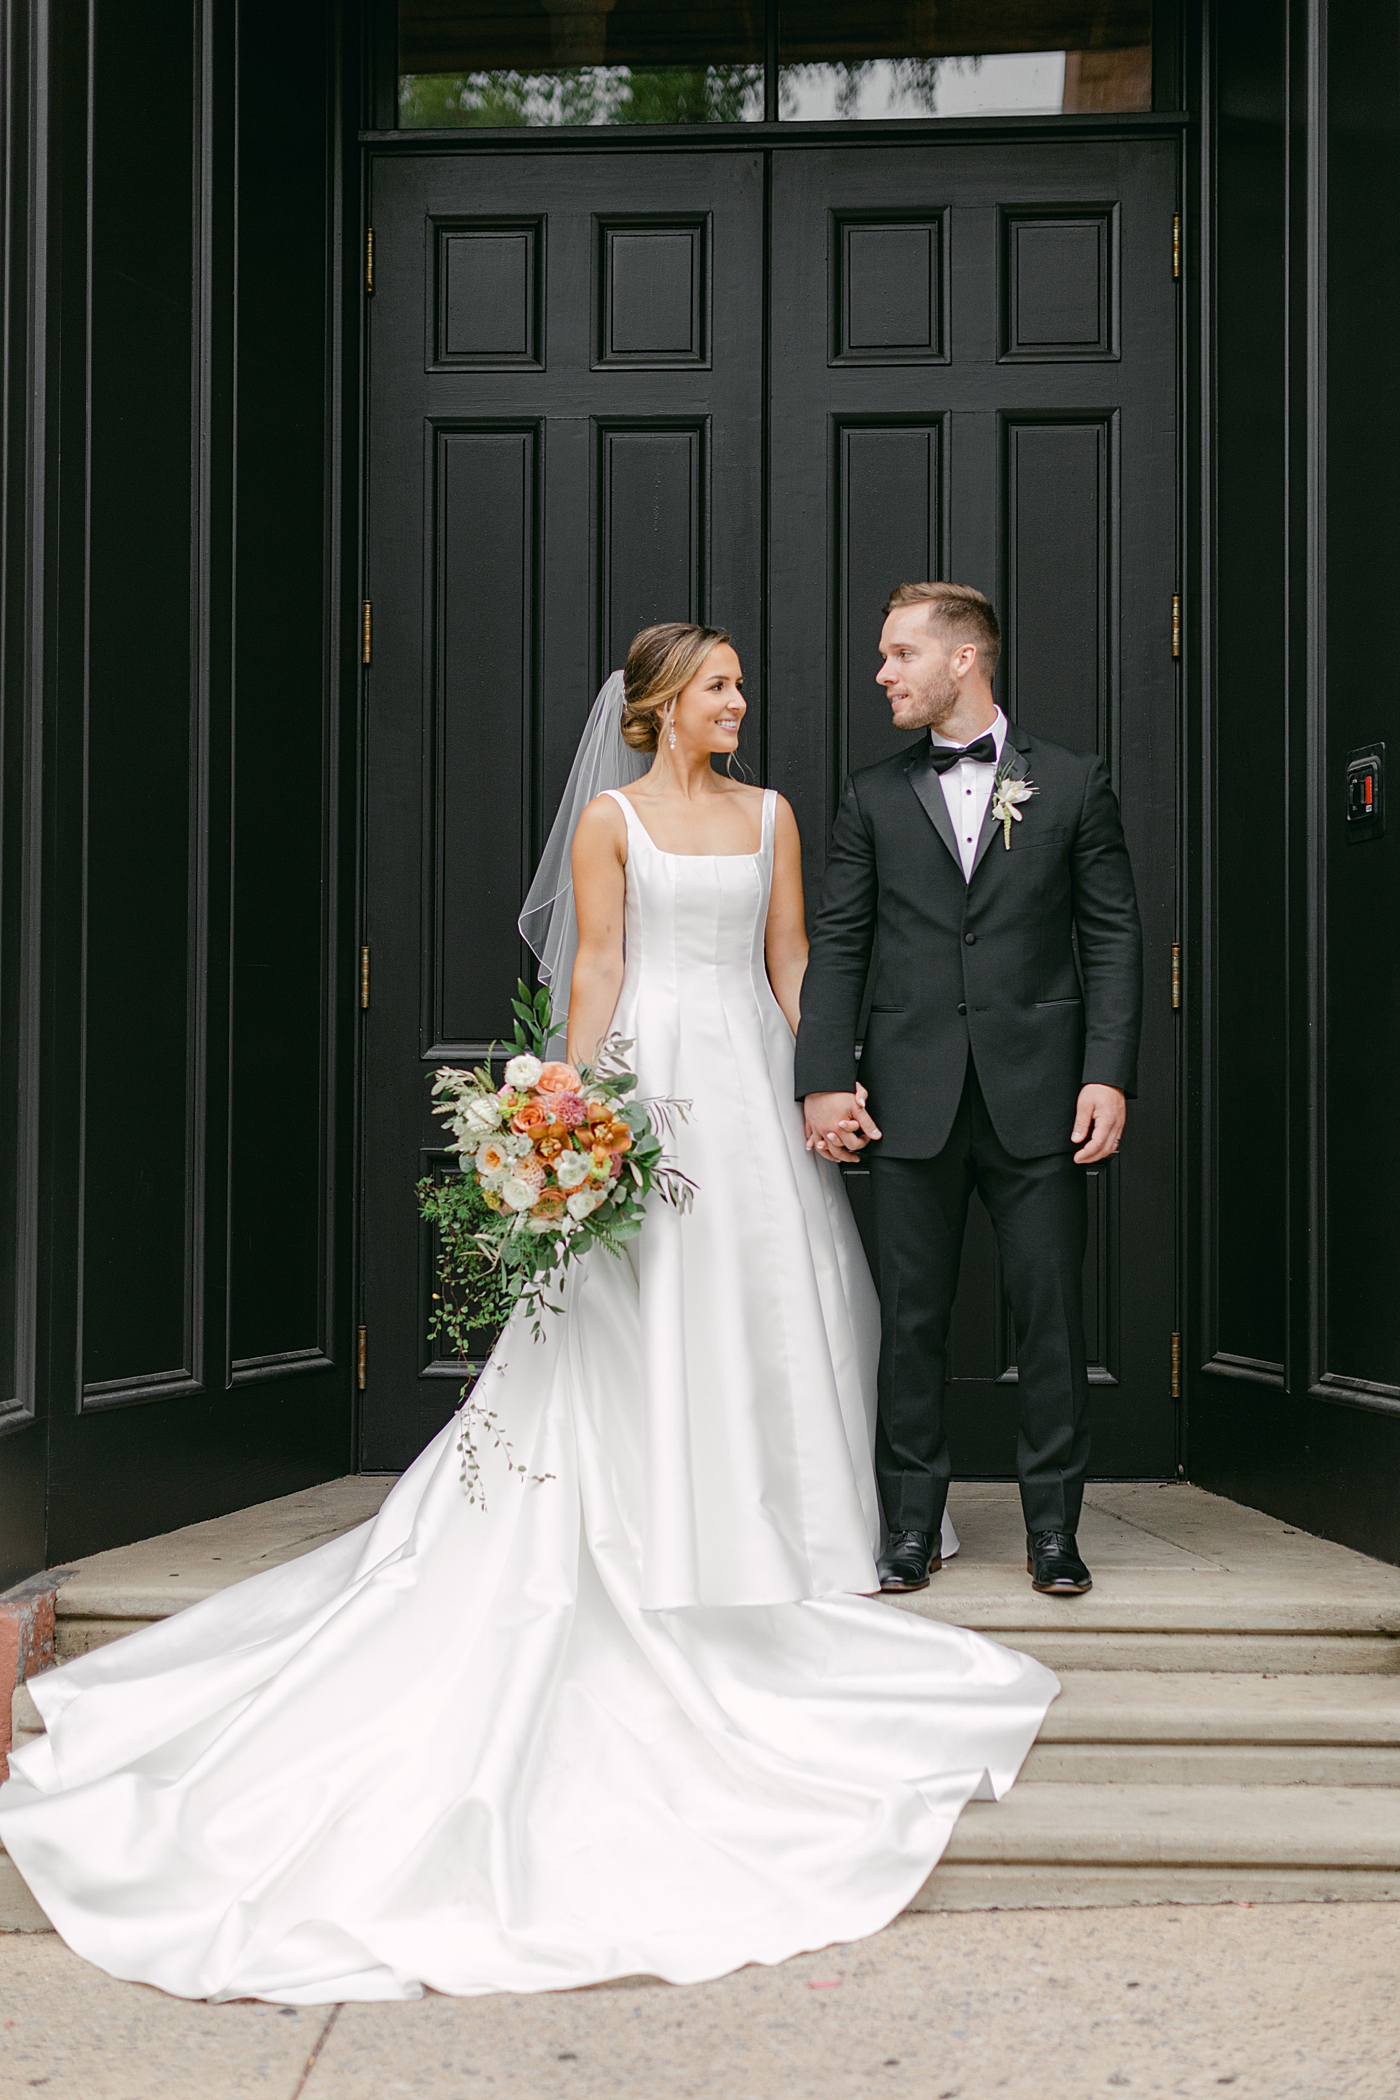 Bride and groom holding hands in a black doorway | Photo by Hope Helmuth Photography